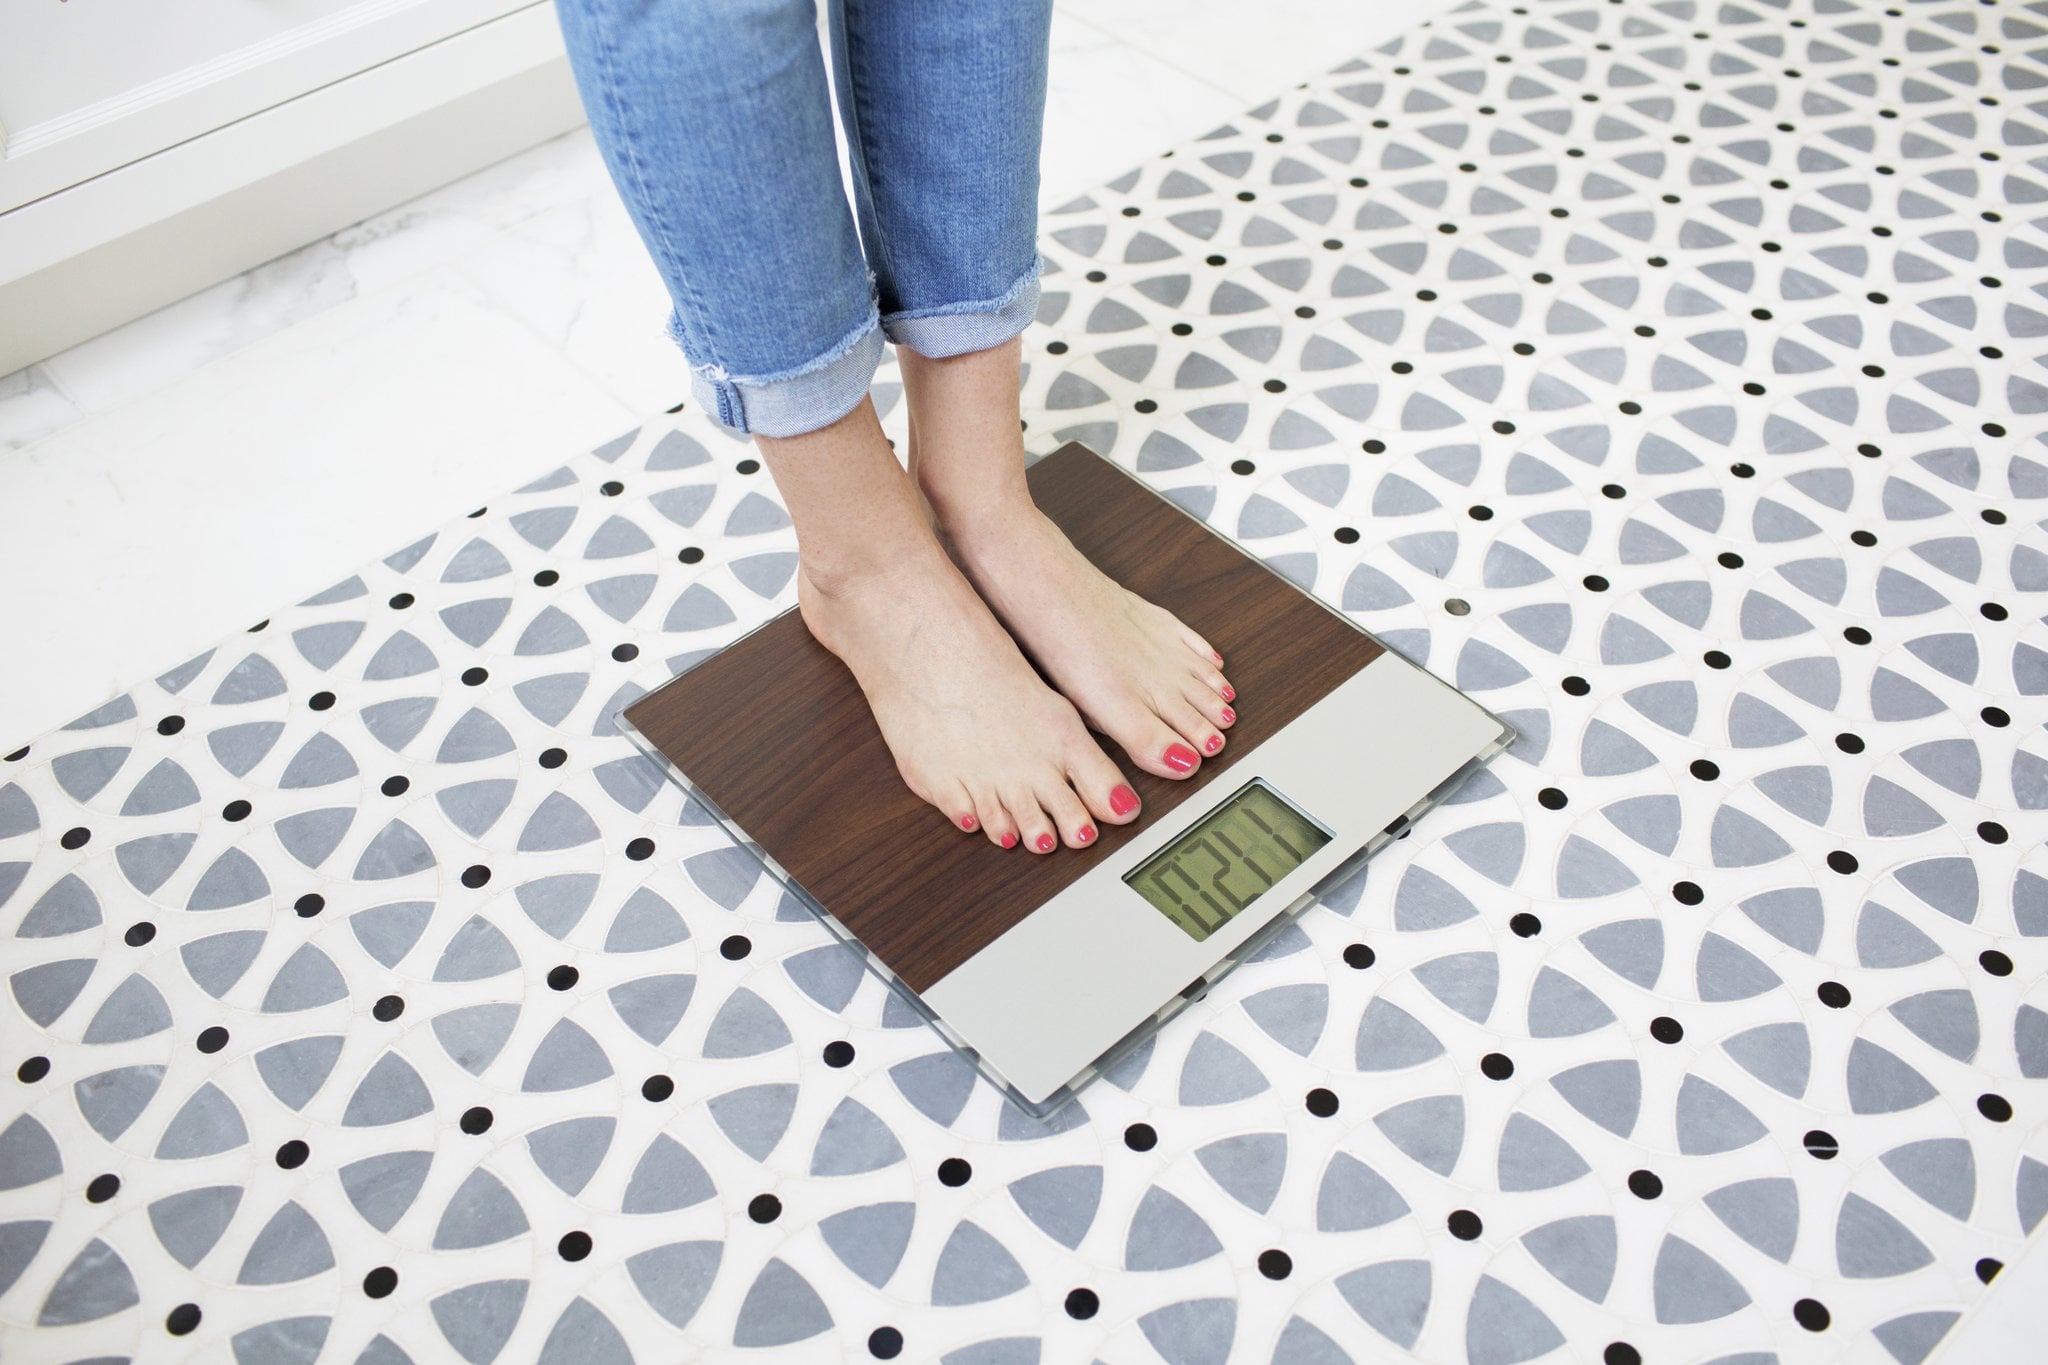 How To Measure Weight Loss Without A Scale